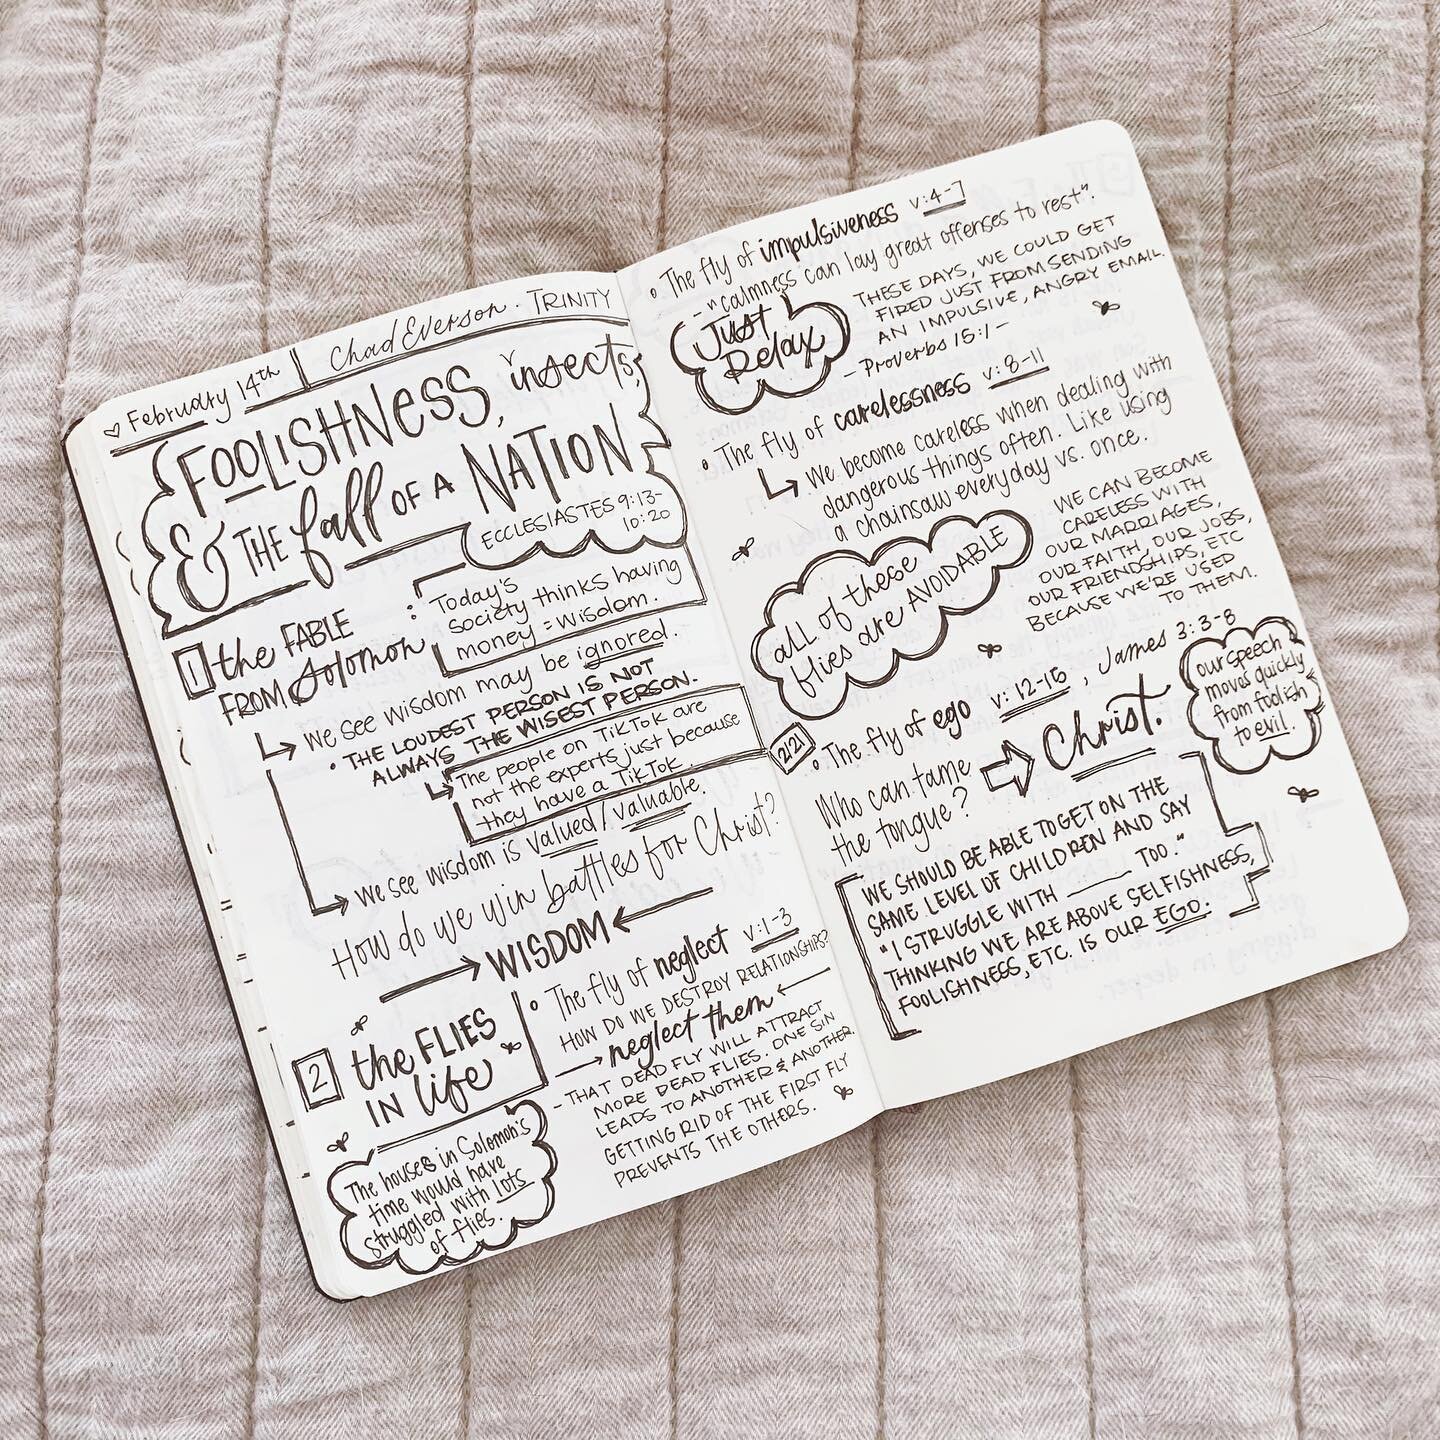 Let&rsquo;s chat! I&rsquo;ve got 5️⃣ note-taking tips and tricks lined up for you tonight if you want meetings to be a little less lame, sermon notes (like these!) to be a little more memorable, or journaling to be a little more fun!
⠀⠀⠀⠀⠀⠀⠀⠀⠀
☝🏻- C